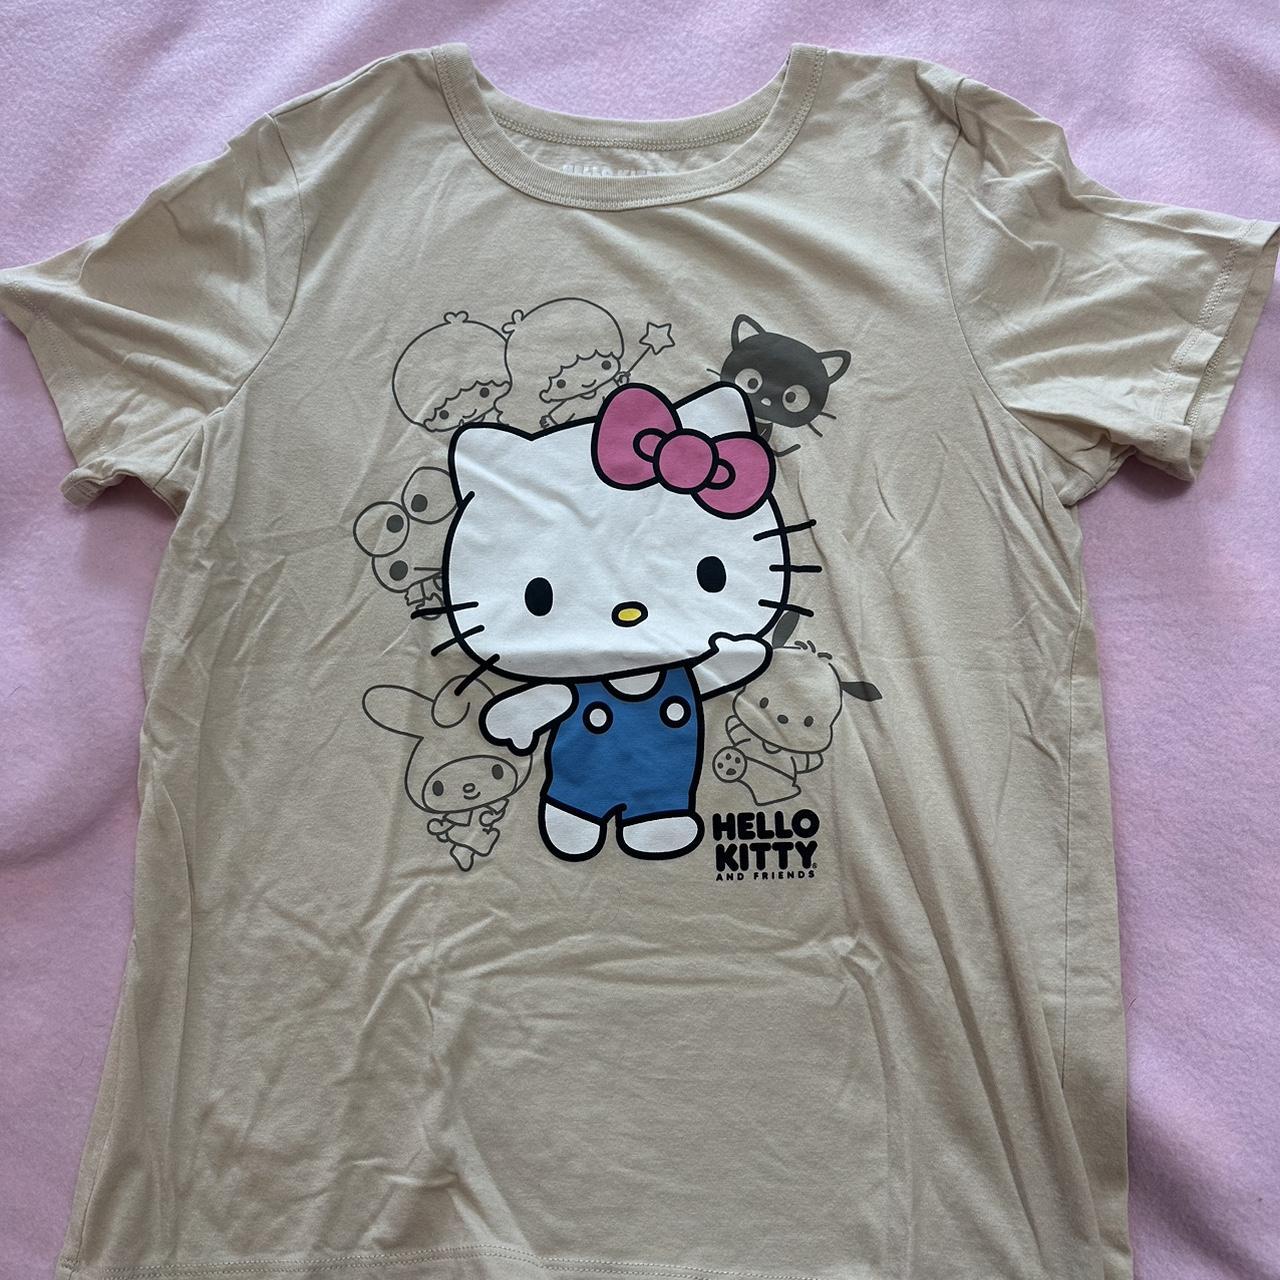 Hello kitty shirt never worn or tired on size... - Depop